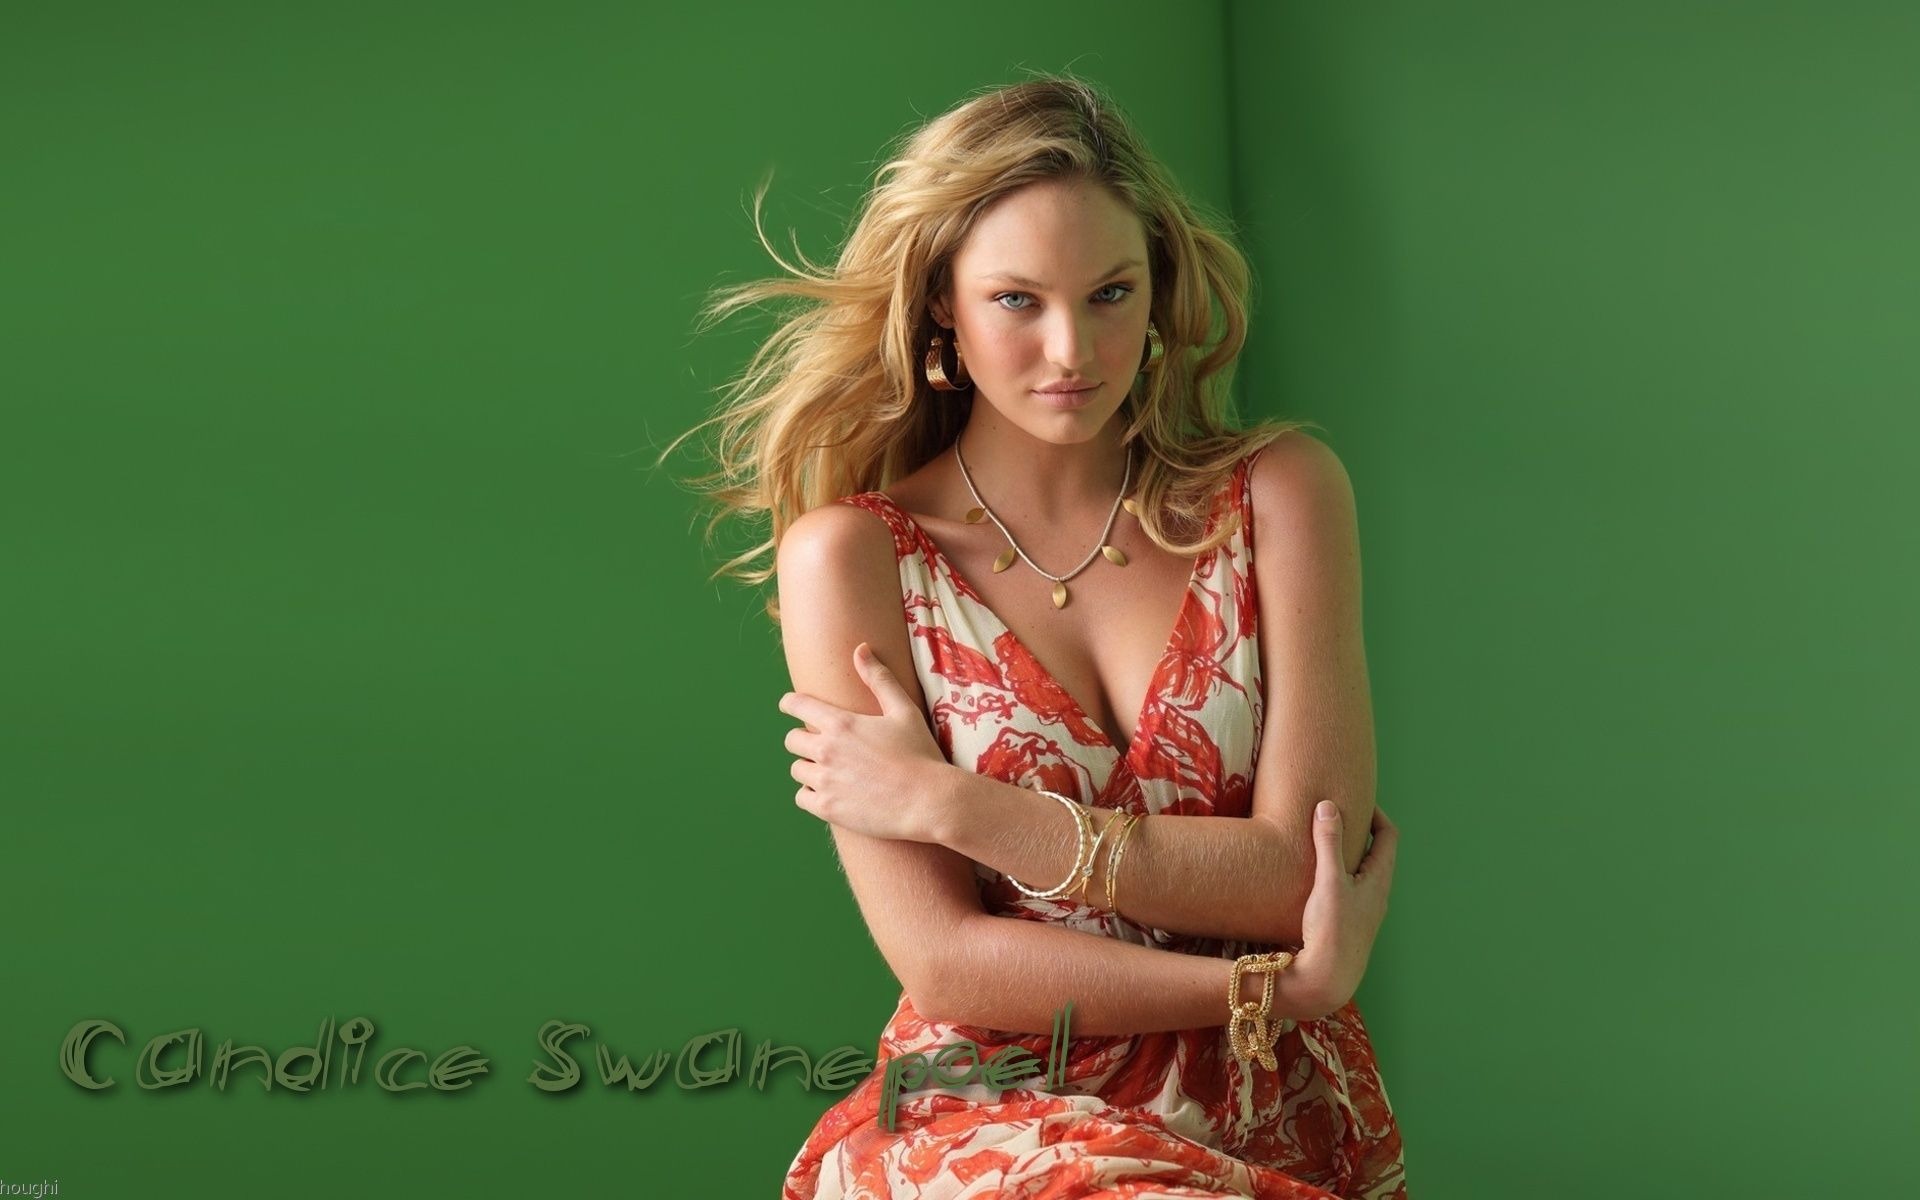 Candice Swanepoel #016 - 1920x1200 Wallpapers Pictures Photos Images